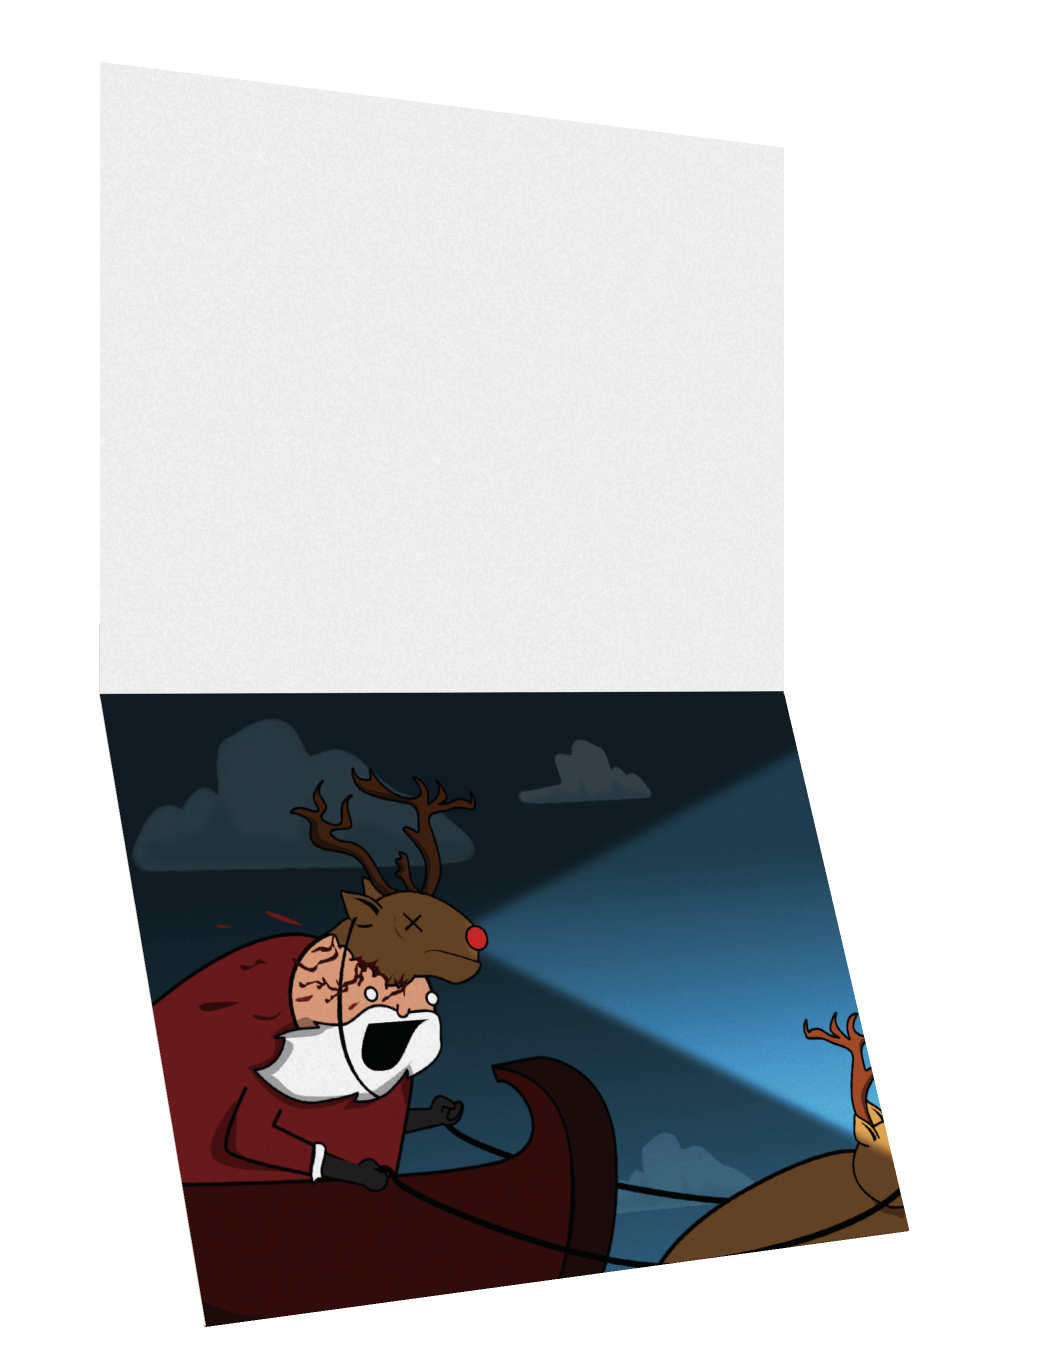 Rudolph - NSFW Holiday Card